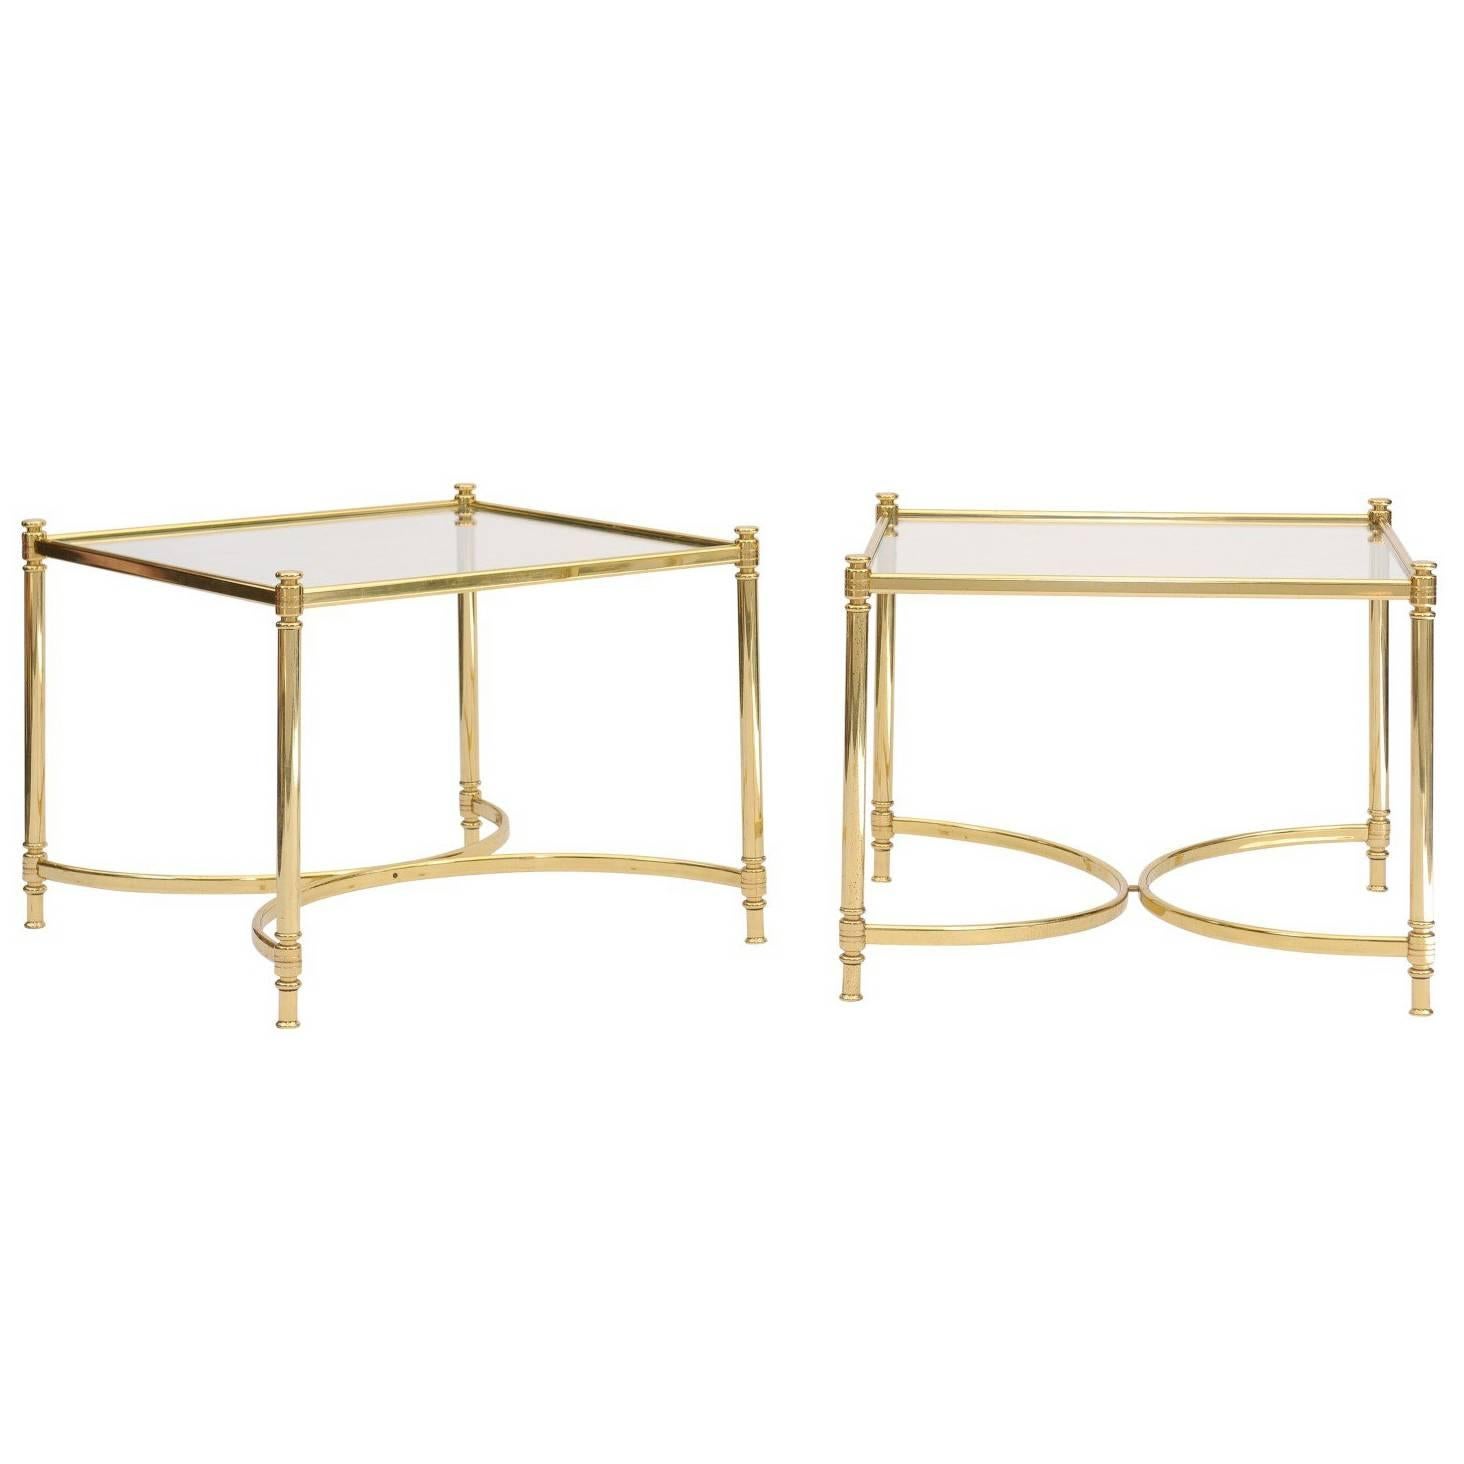 Pair of French 1970s Square Brass and Glass Side Tables with Demilune Stretchers